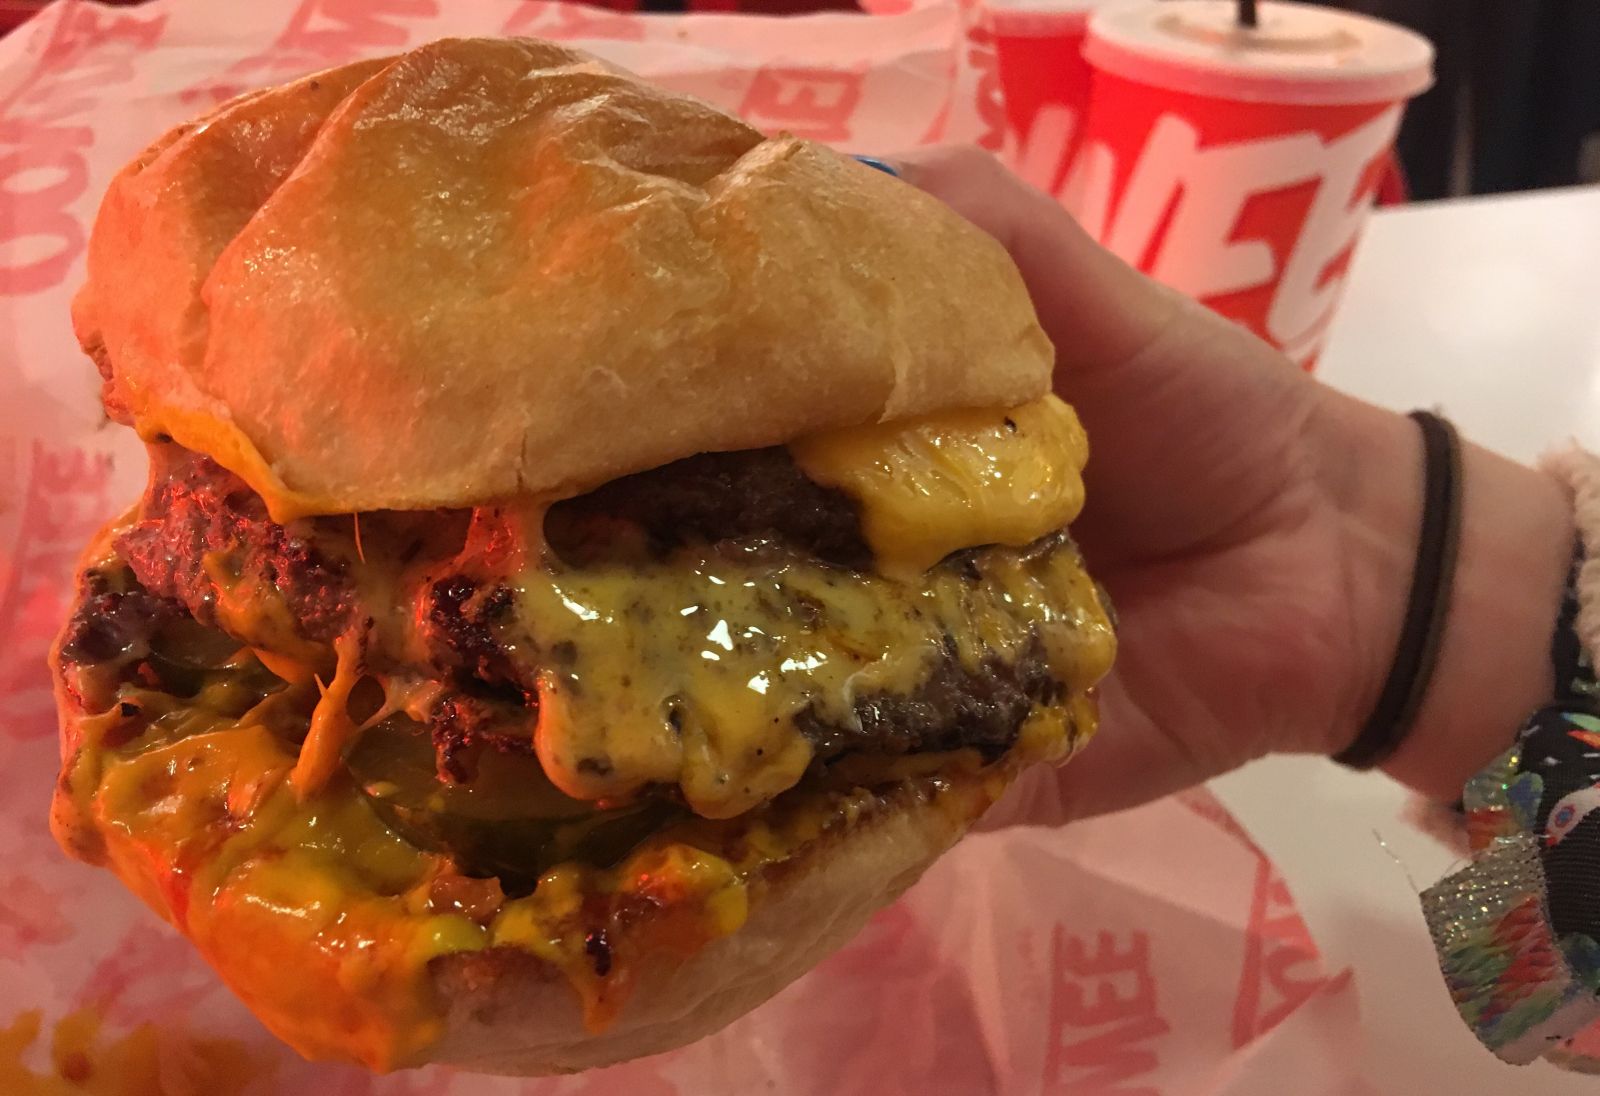 The Double Cheese at Oowee Diner North Street // Tuesday 18th June 2019